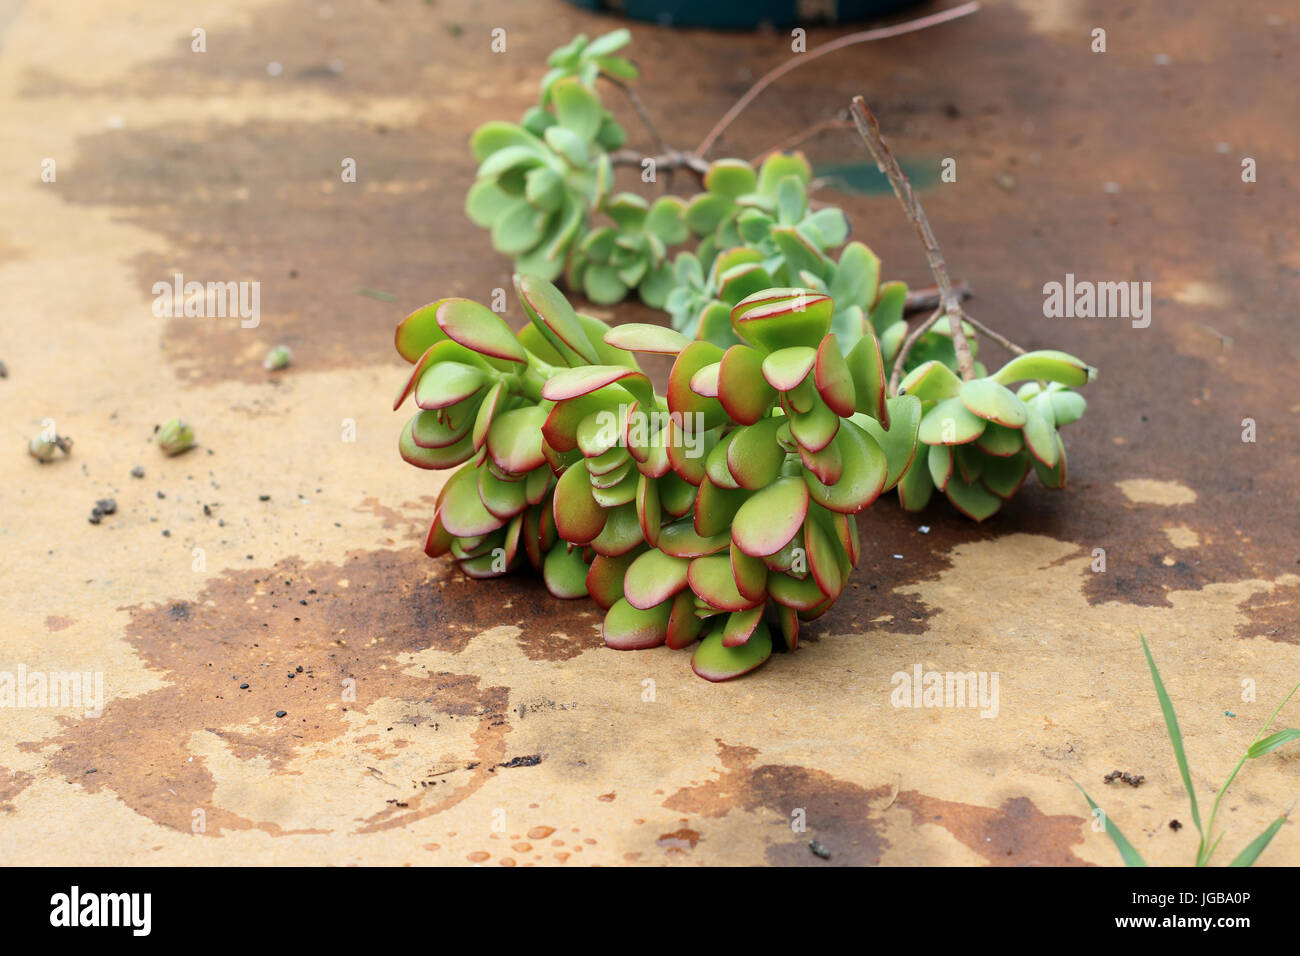 Freshly trimmed Crassula ovata or also known as Jade plant Stock Photo